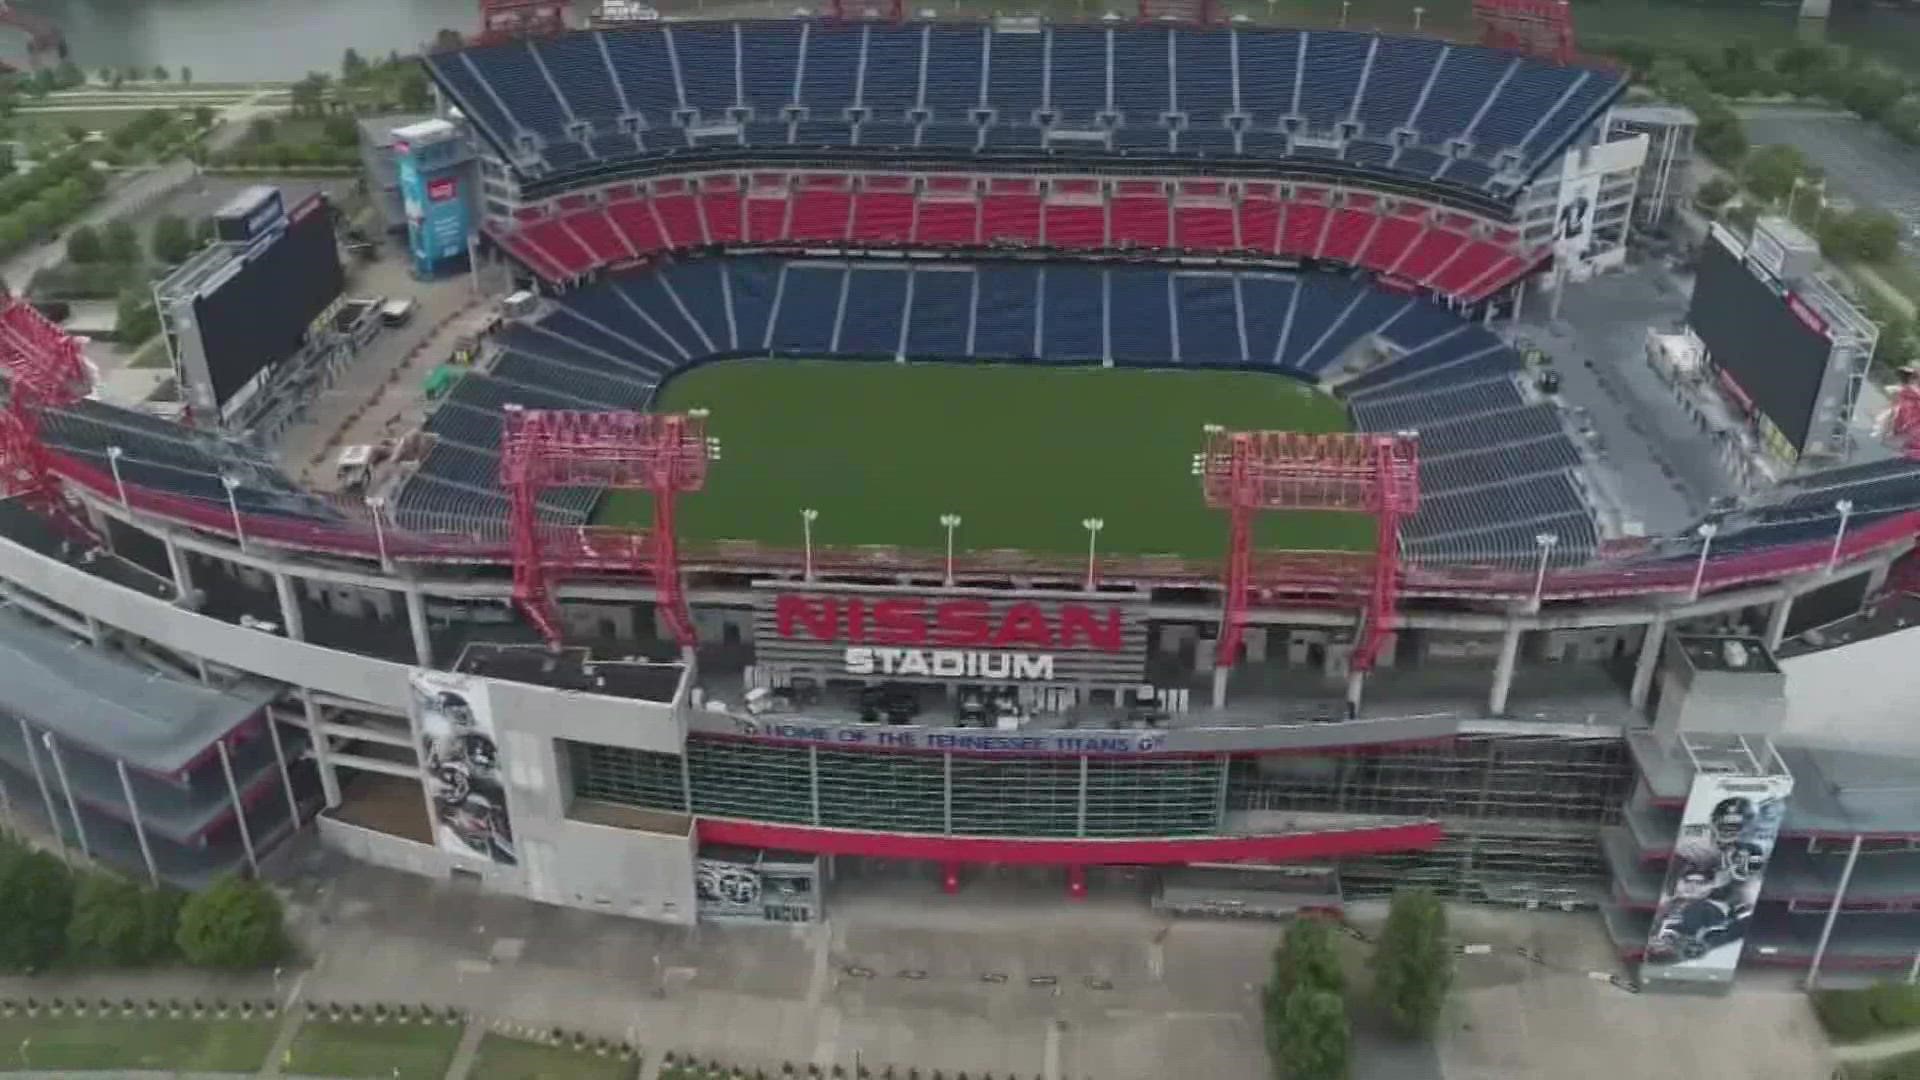 Nashville's mayor announced the Tennessee Titans are getting a new home. That $2.1 billion stadium will go up directly east of the current Nissan Stadium.